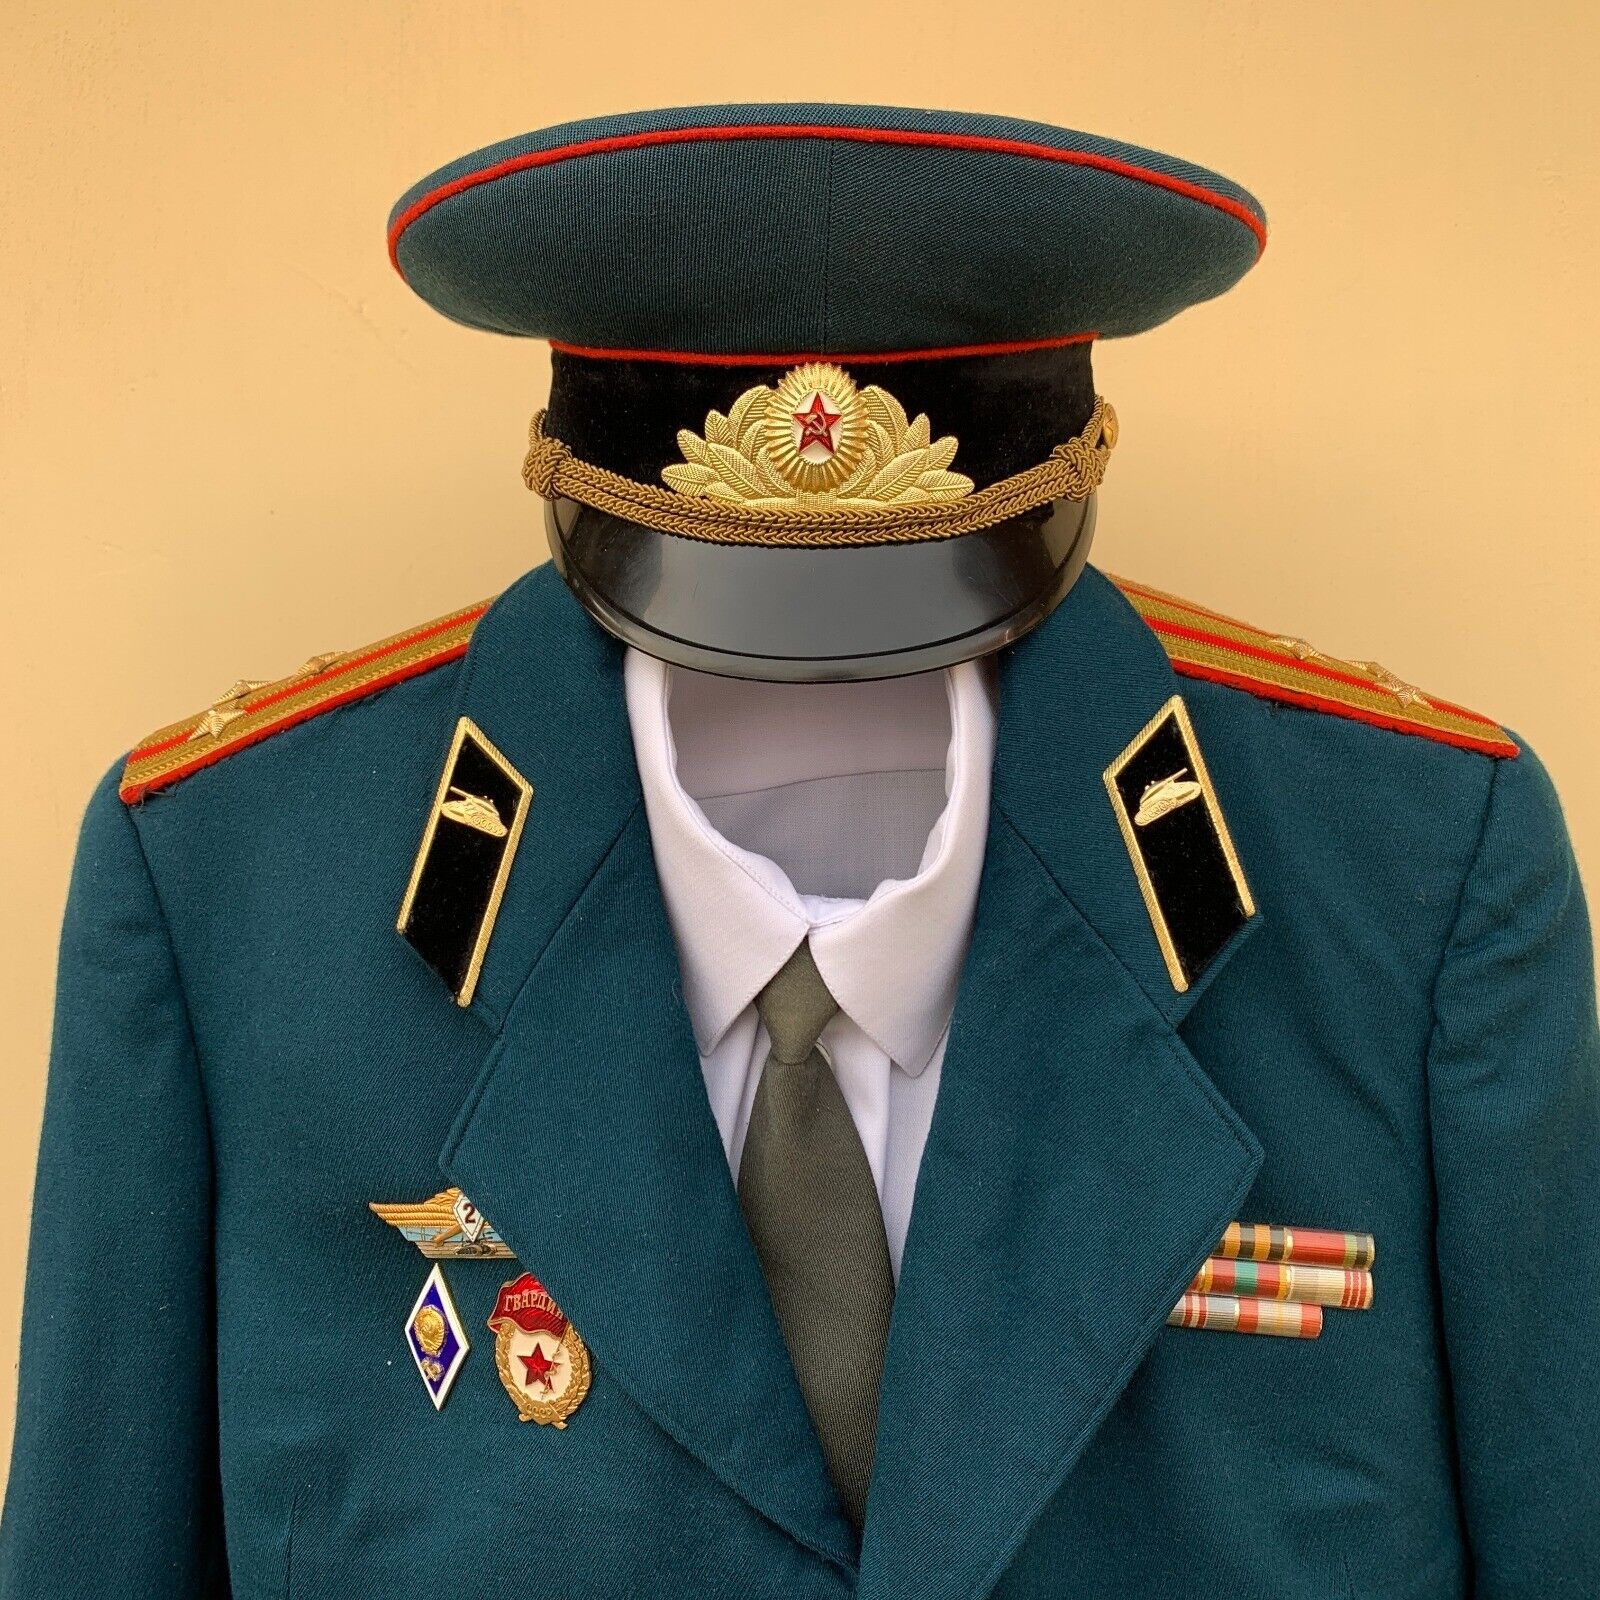 Vintage 1970-80s Soviet military uniform of a tankman with the rank of colonel.